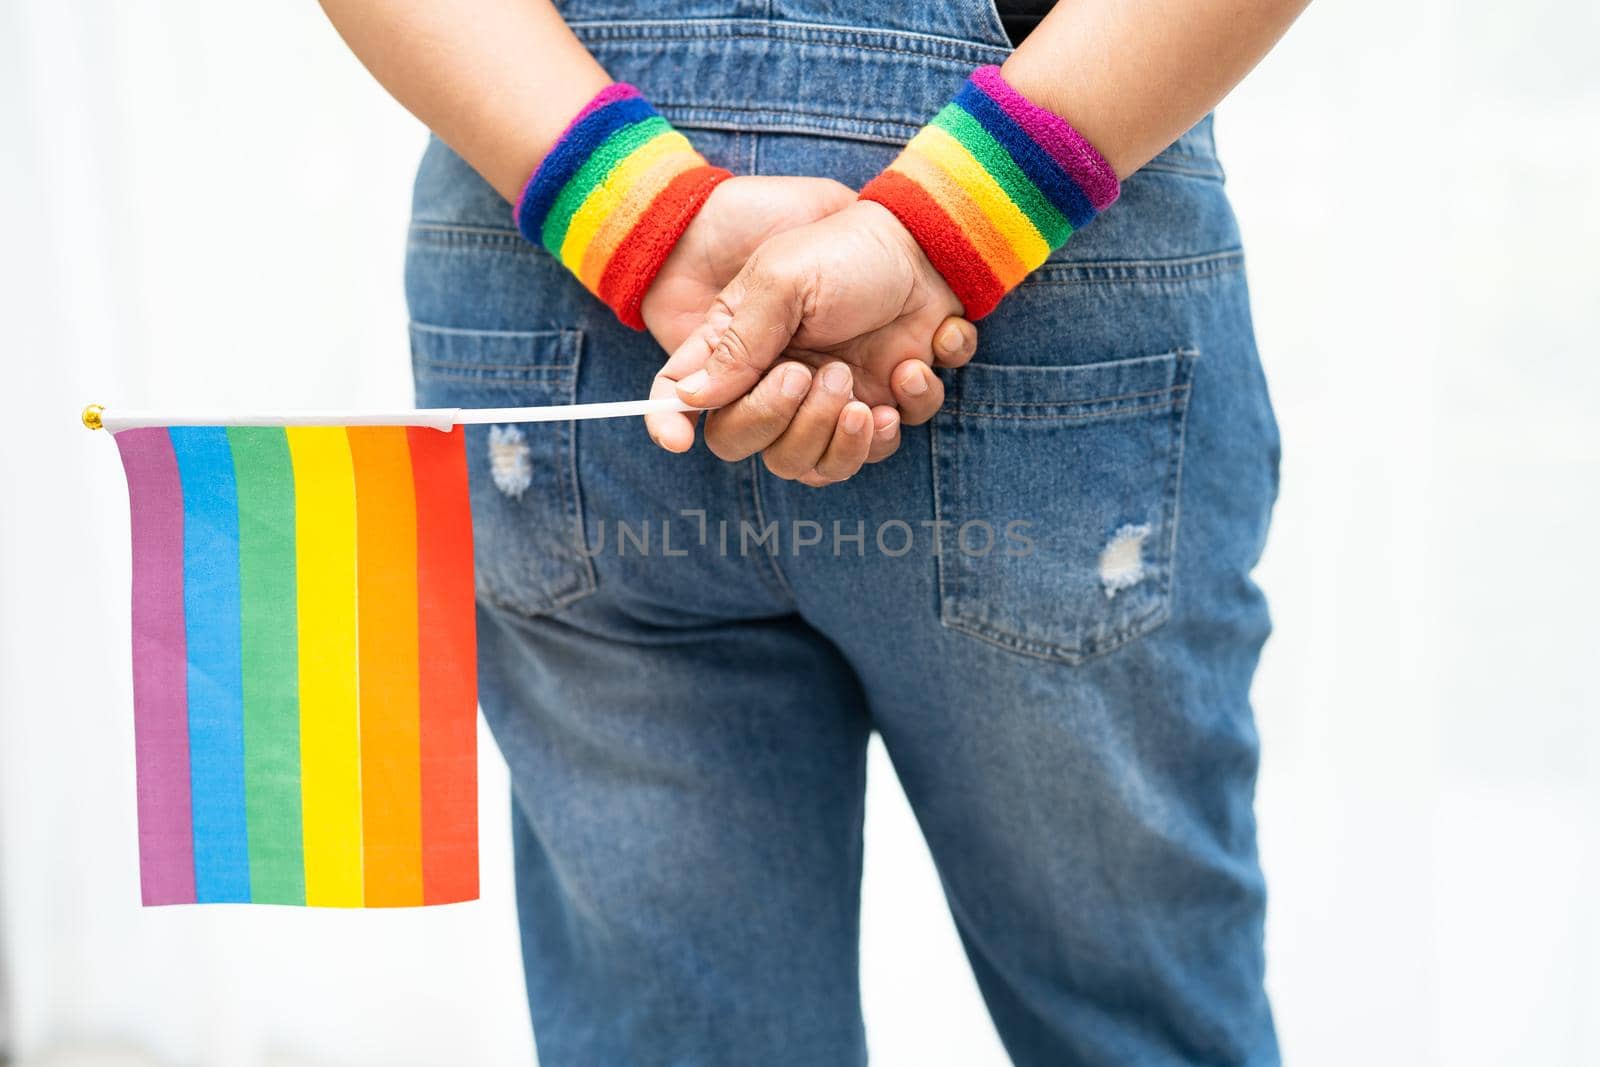 Asian lady wearing blue jean jacket or denim shirt and holding rainbow color flag, symbol of LGBT pride month celebrate annual in June social of gay, lesbian, bisexual, transgender, human rights. by pamai